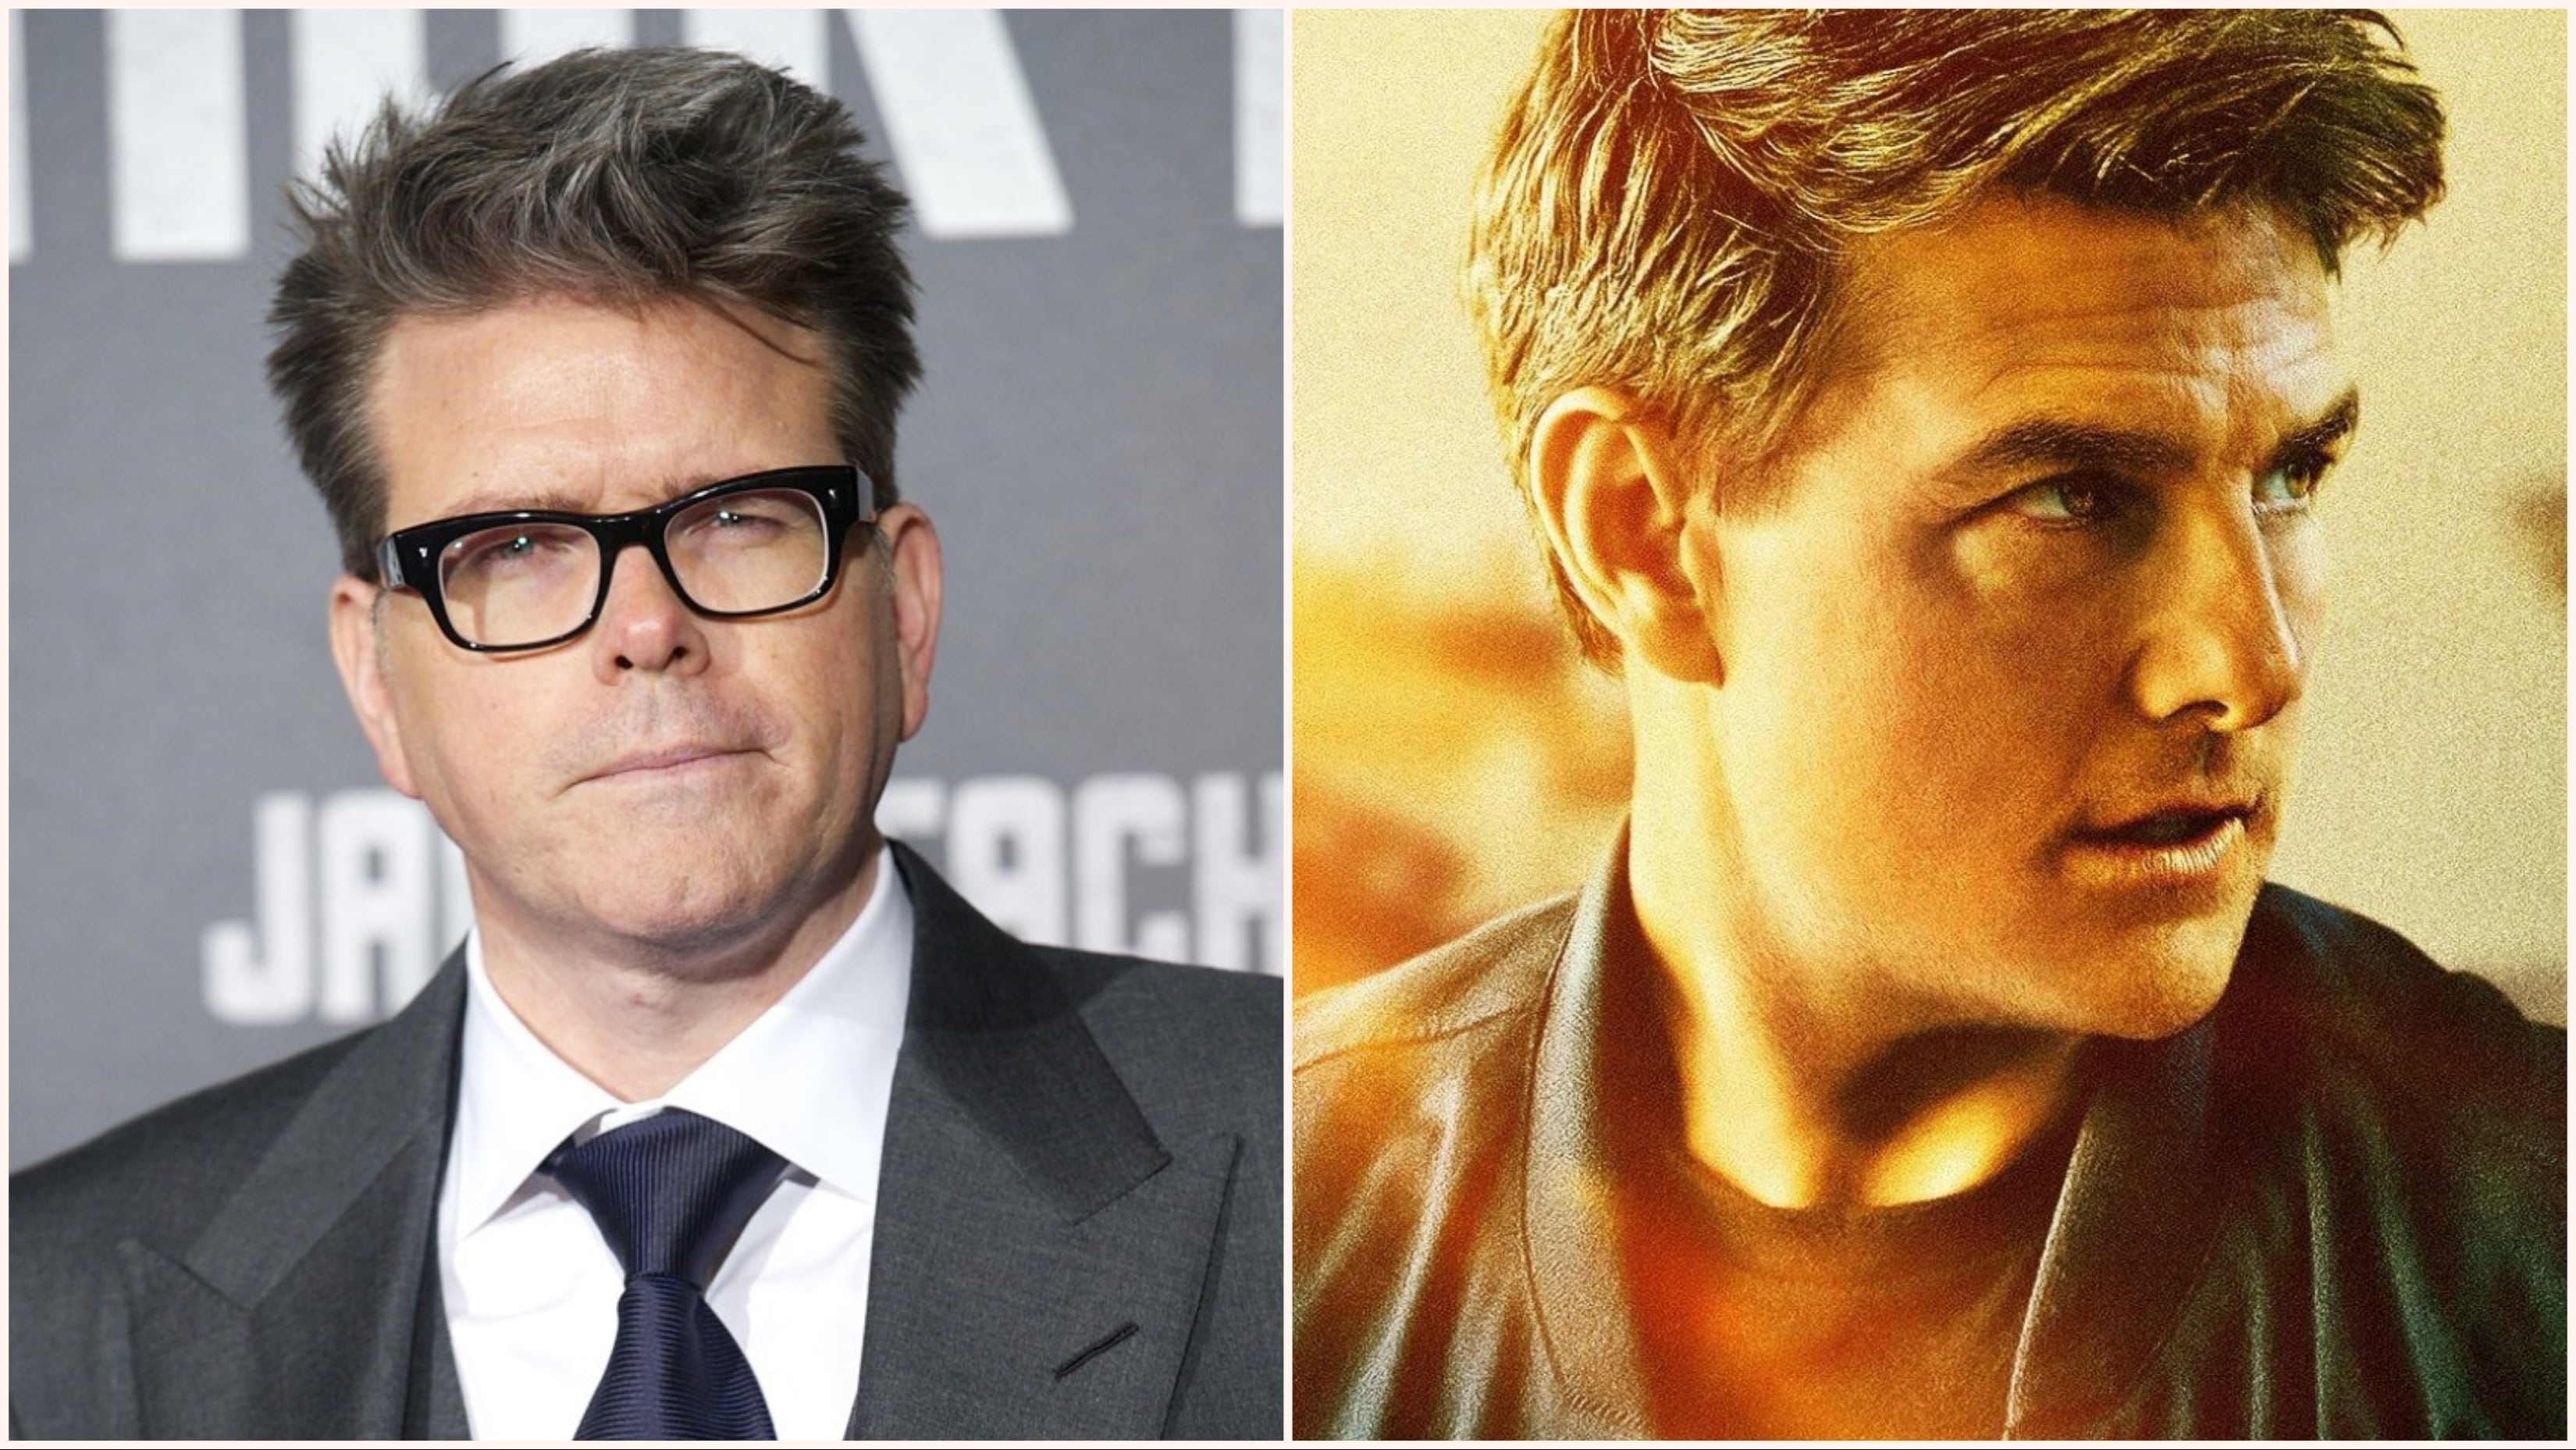 Christopher McQuarrie will return to direct the next two Mission: Impossible films back to back, with release dates in the summer of 2021 and 2022.